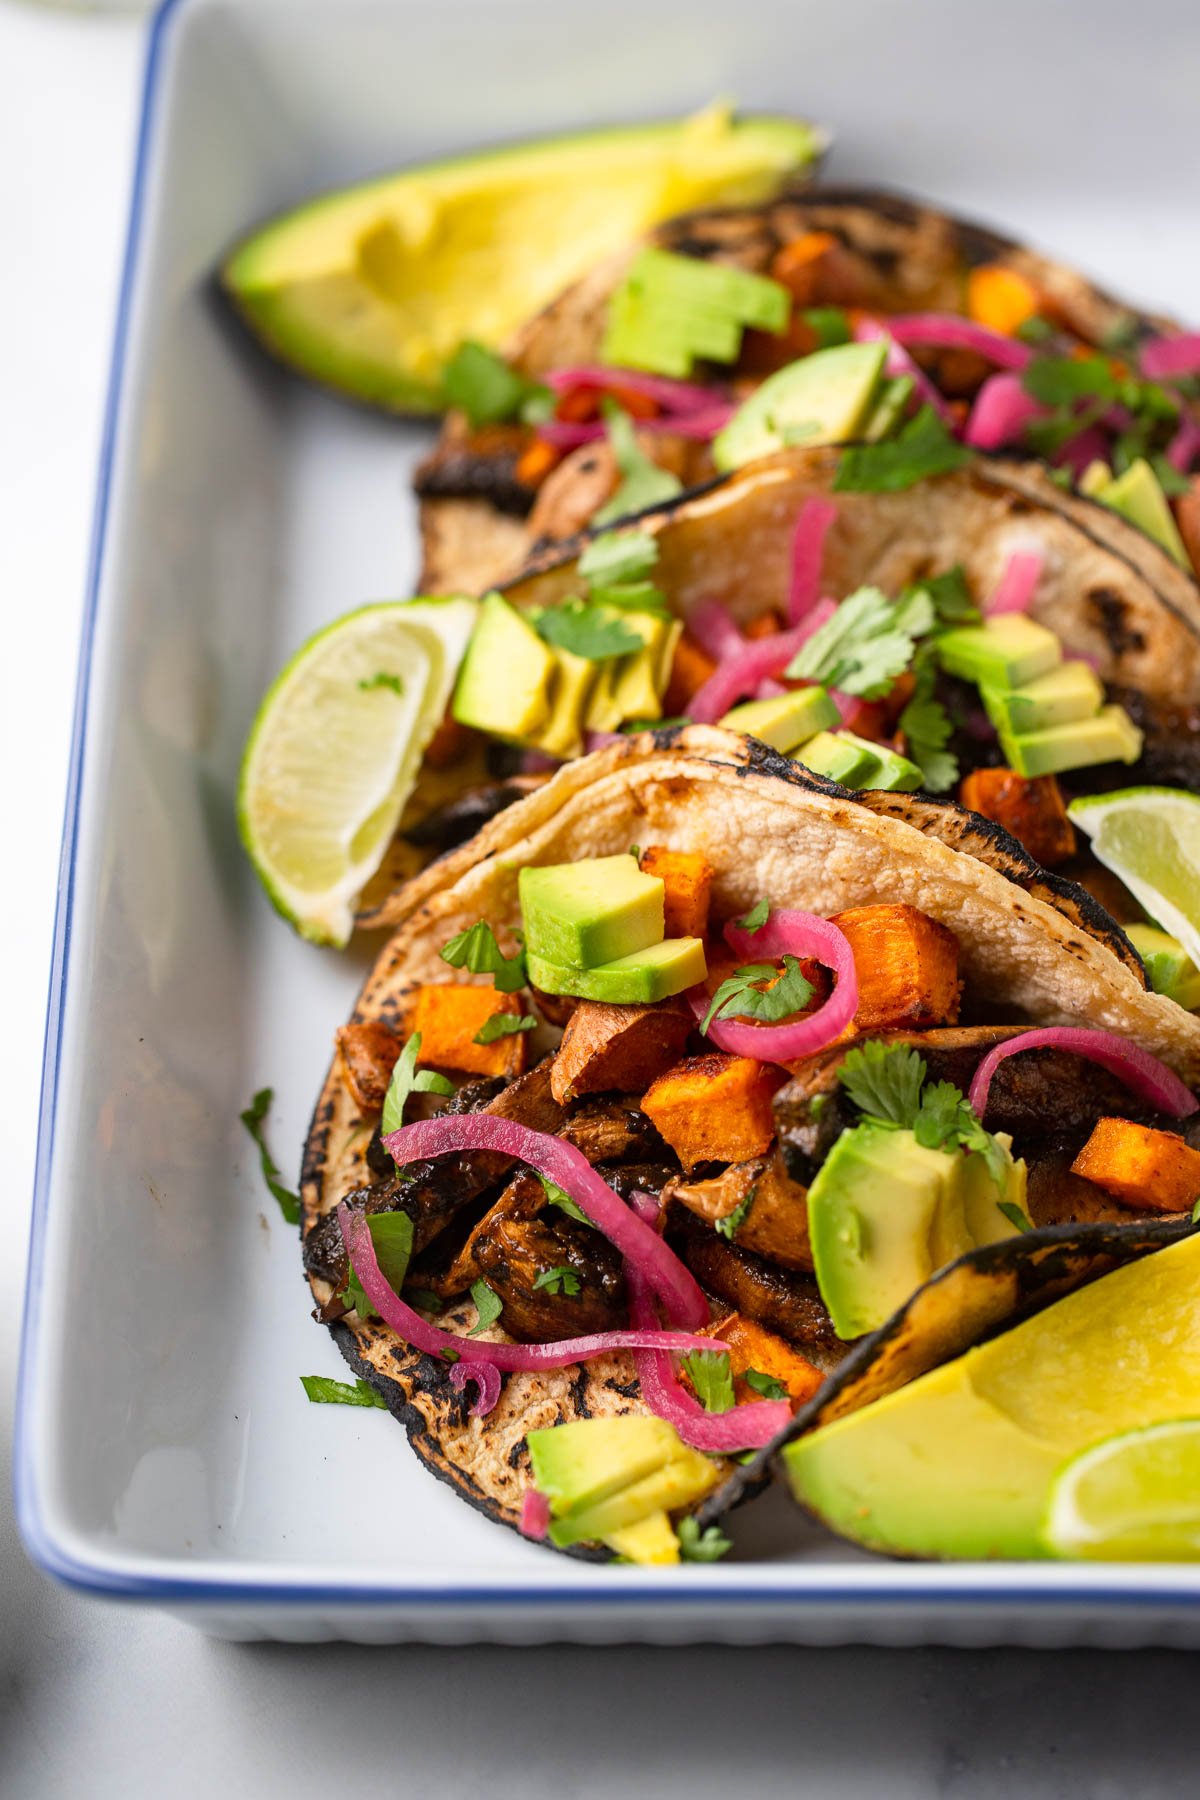 mushroom and sweet potato tacos garnished with sliced avocado, pickled red onion, and chopped cilantro.